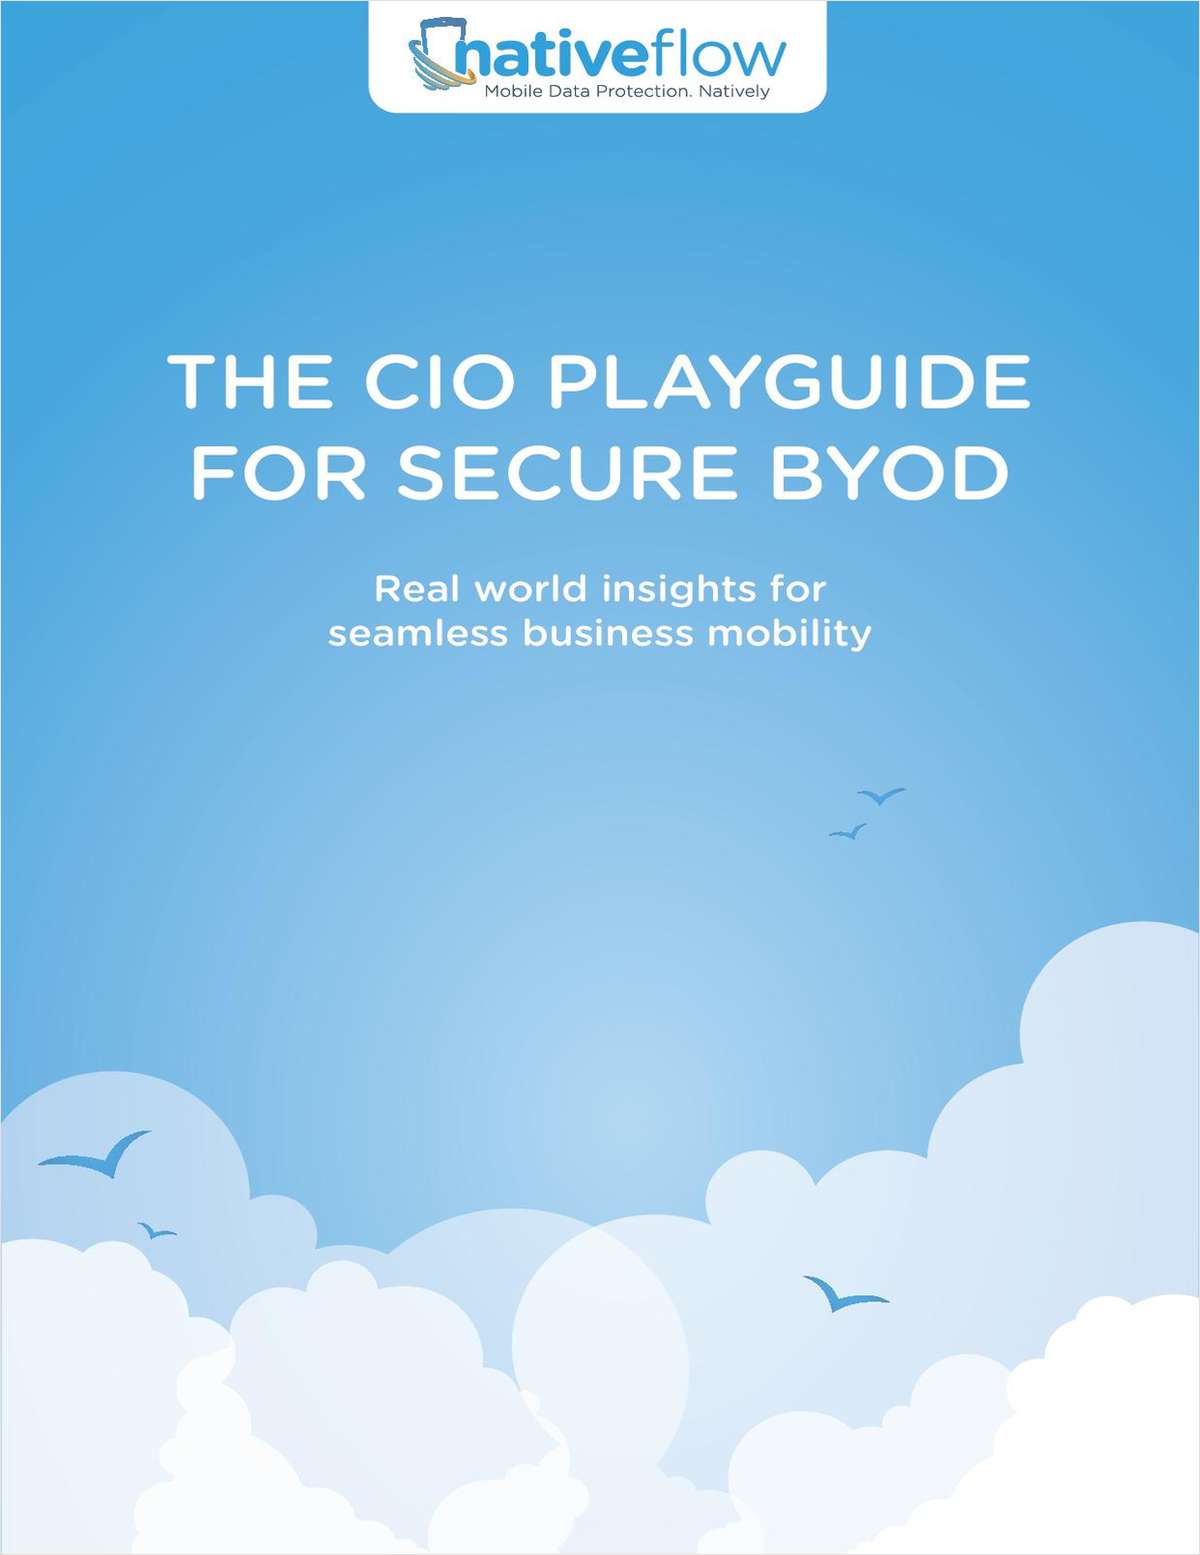 The CIO Playguide for Secure BYOD